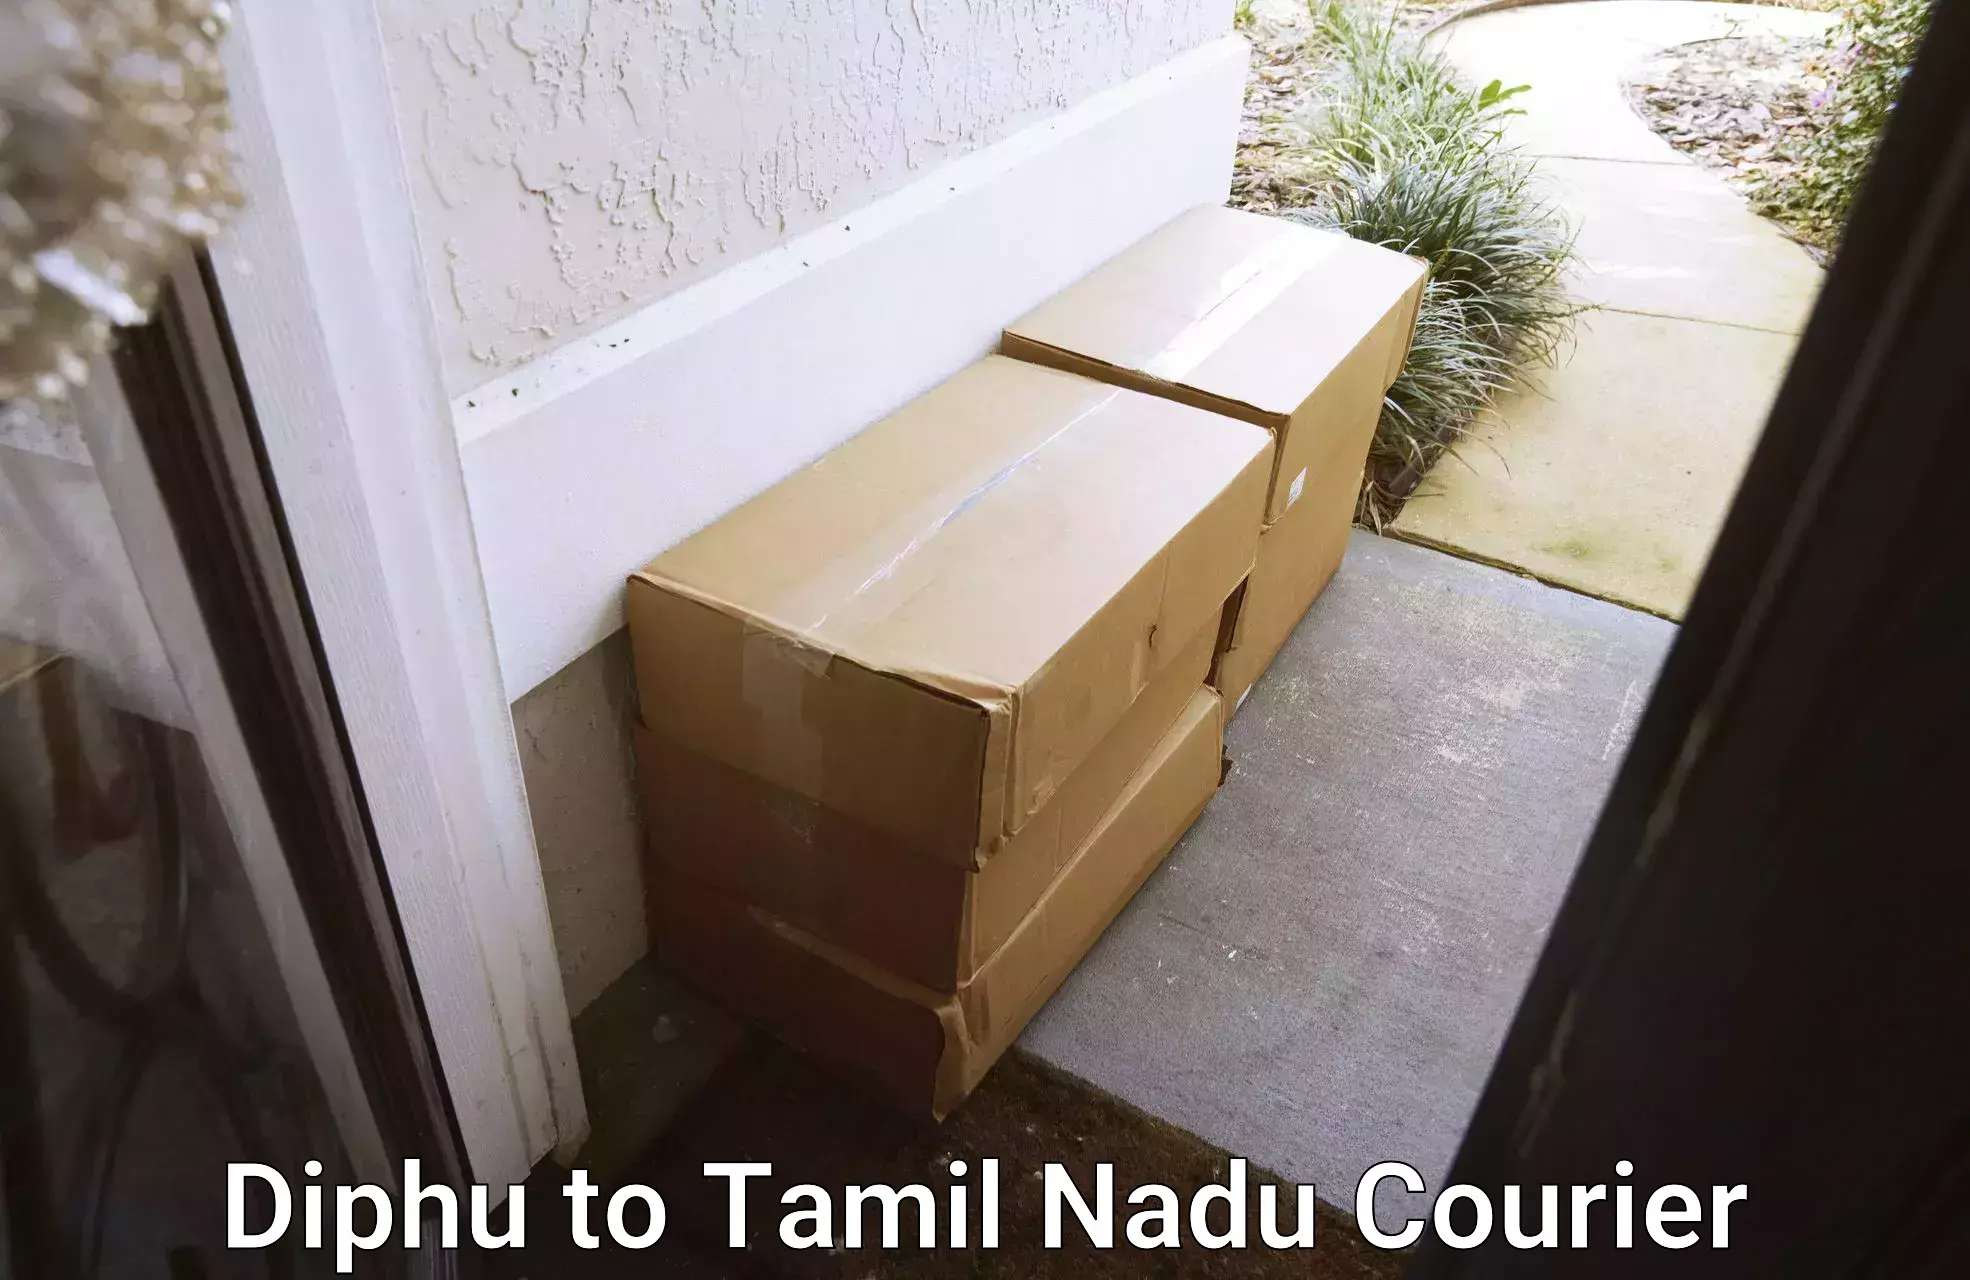 On-time delivery services Diphu to Vellore Institute of Technology